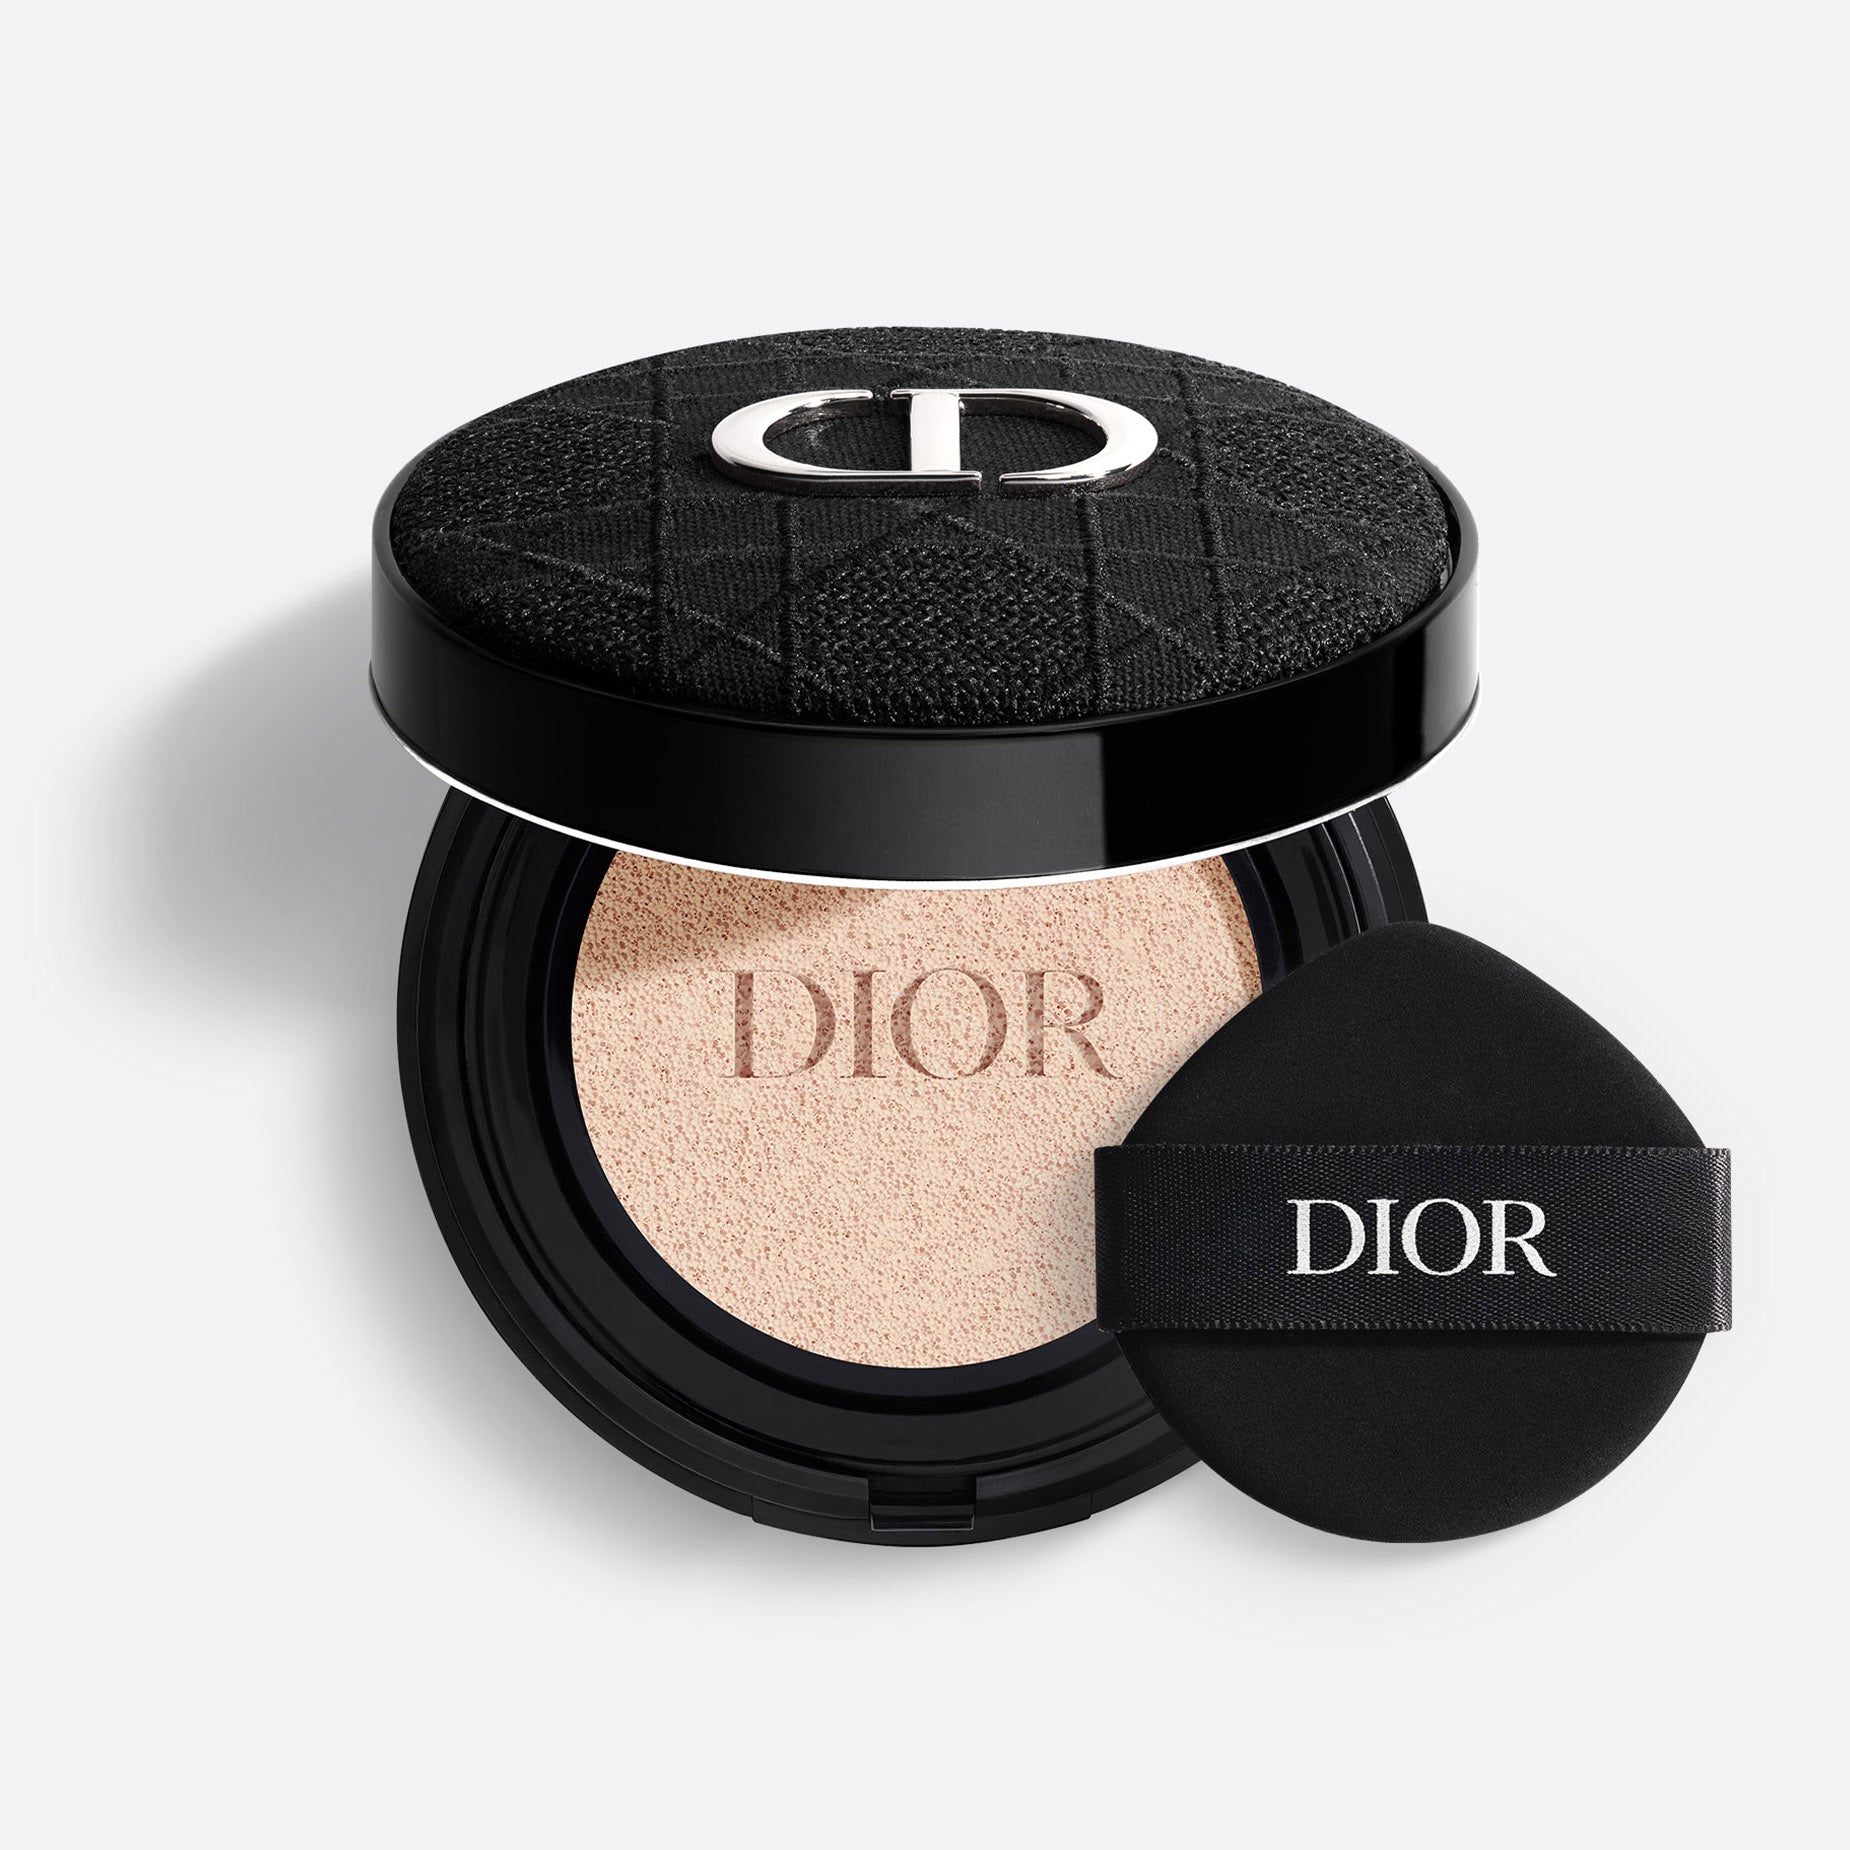 Dior Forever Cushion MIX & MATCH ~ Cushion Foundation - No-Transfer Matte or Hydrating Glow - 24h Wear and High Perfection